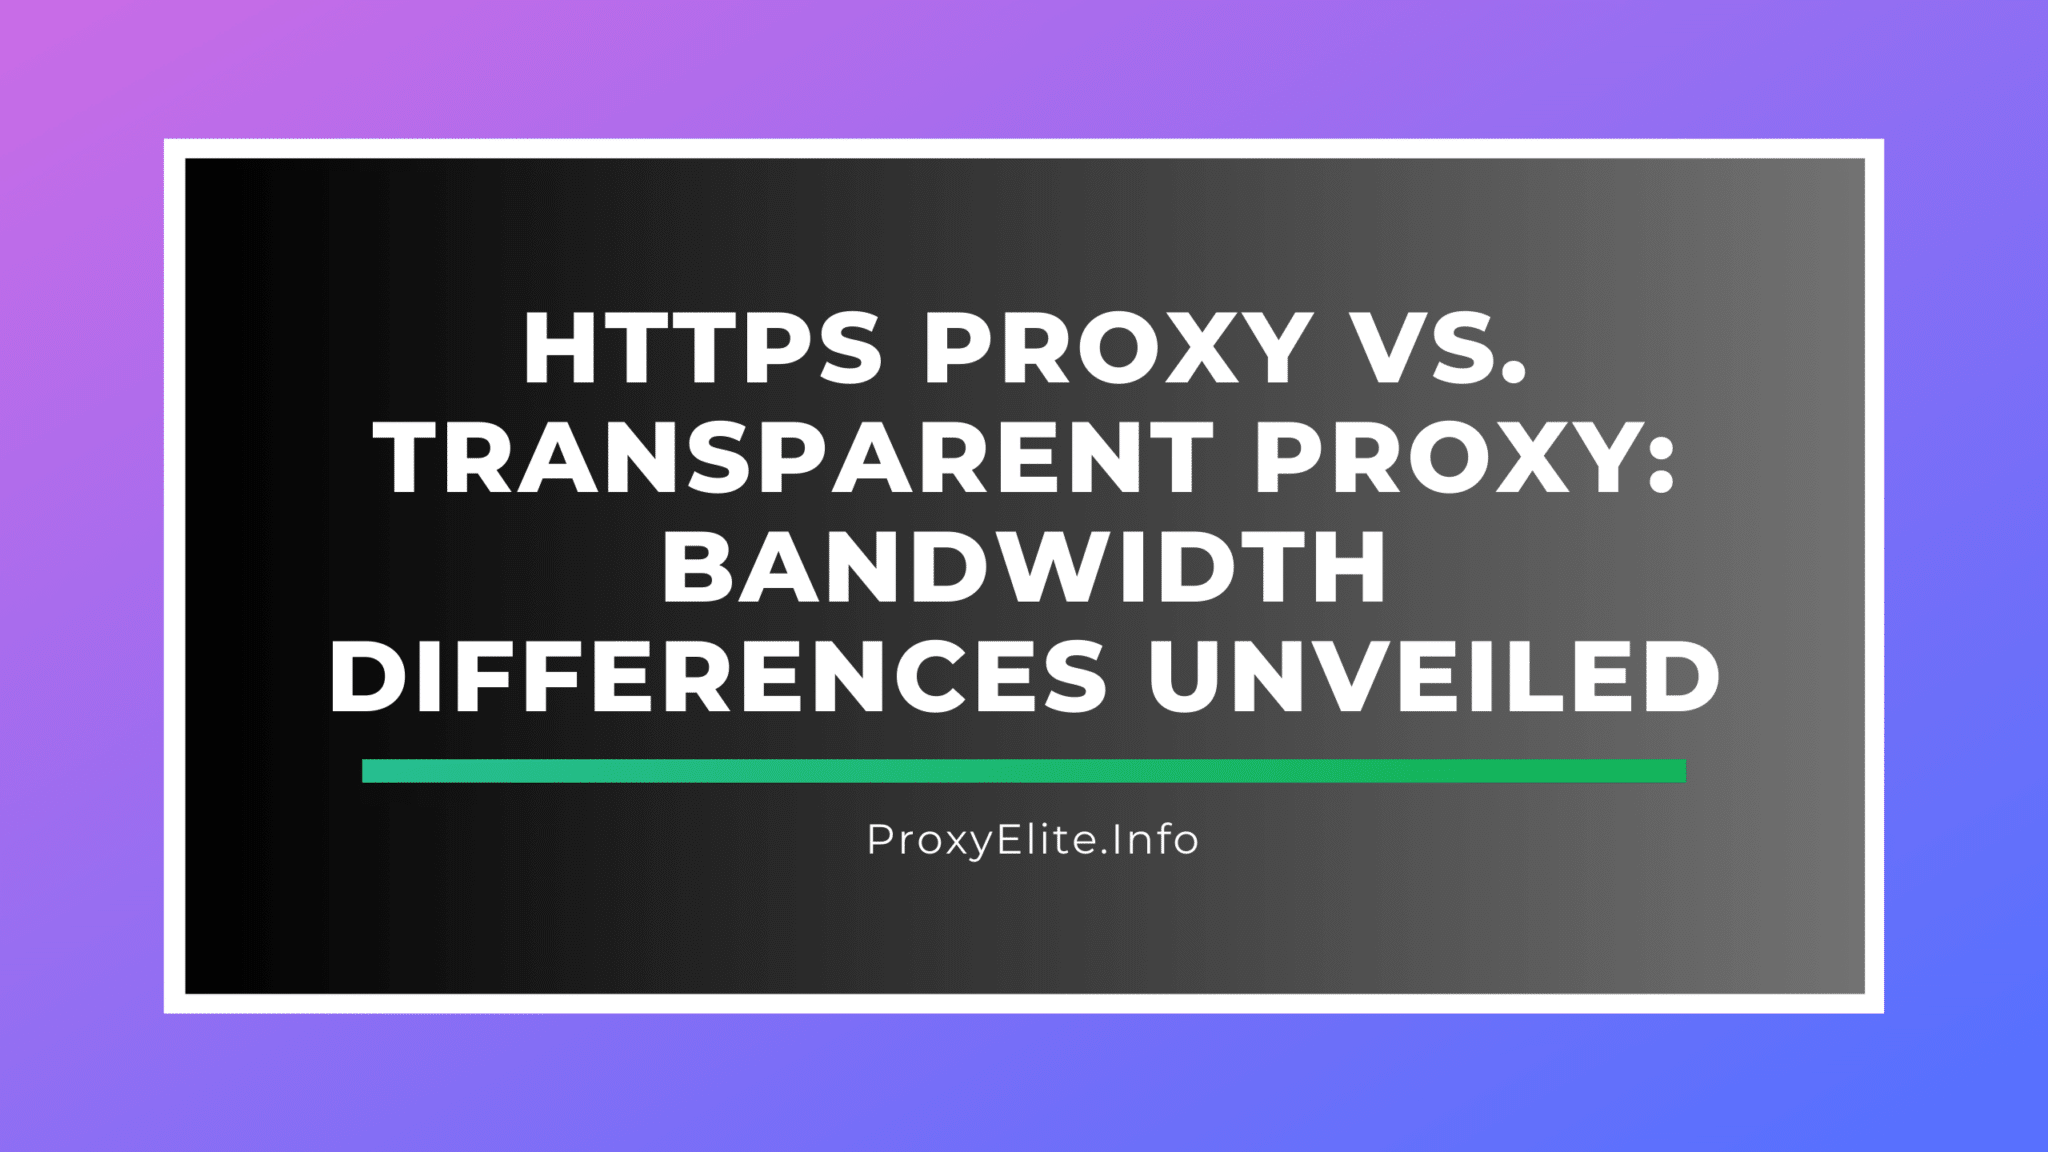 HTTPS Proxy vs. Transparent Proxy: Bandwidth Differences Unveiled